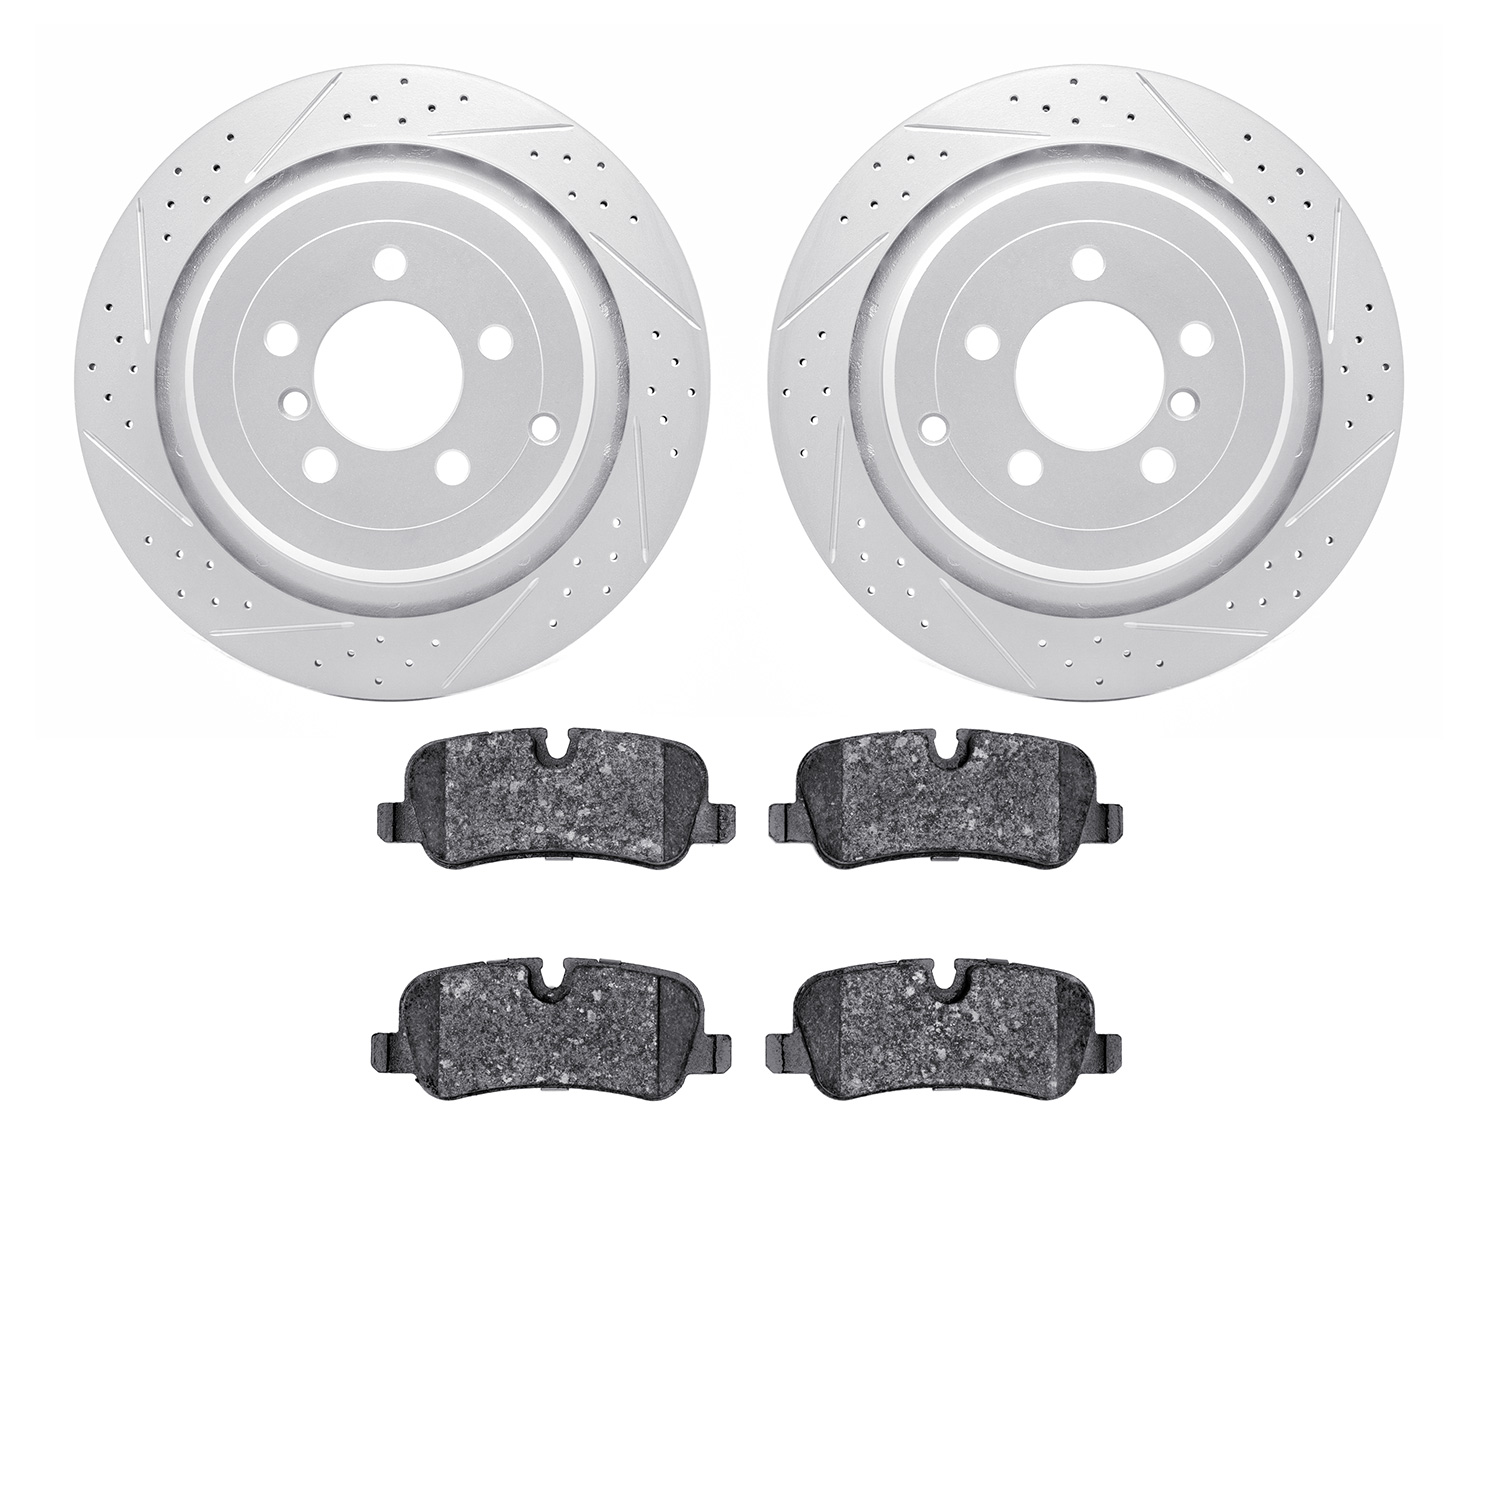 2502-11017 Geoperformance Drilled/Slotted Rotors w/5000 Advanced Brake Pads Kit, 2006-2012 Land Rover, Position: Rear